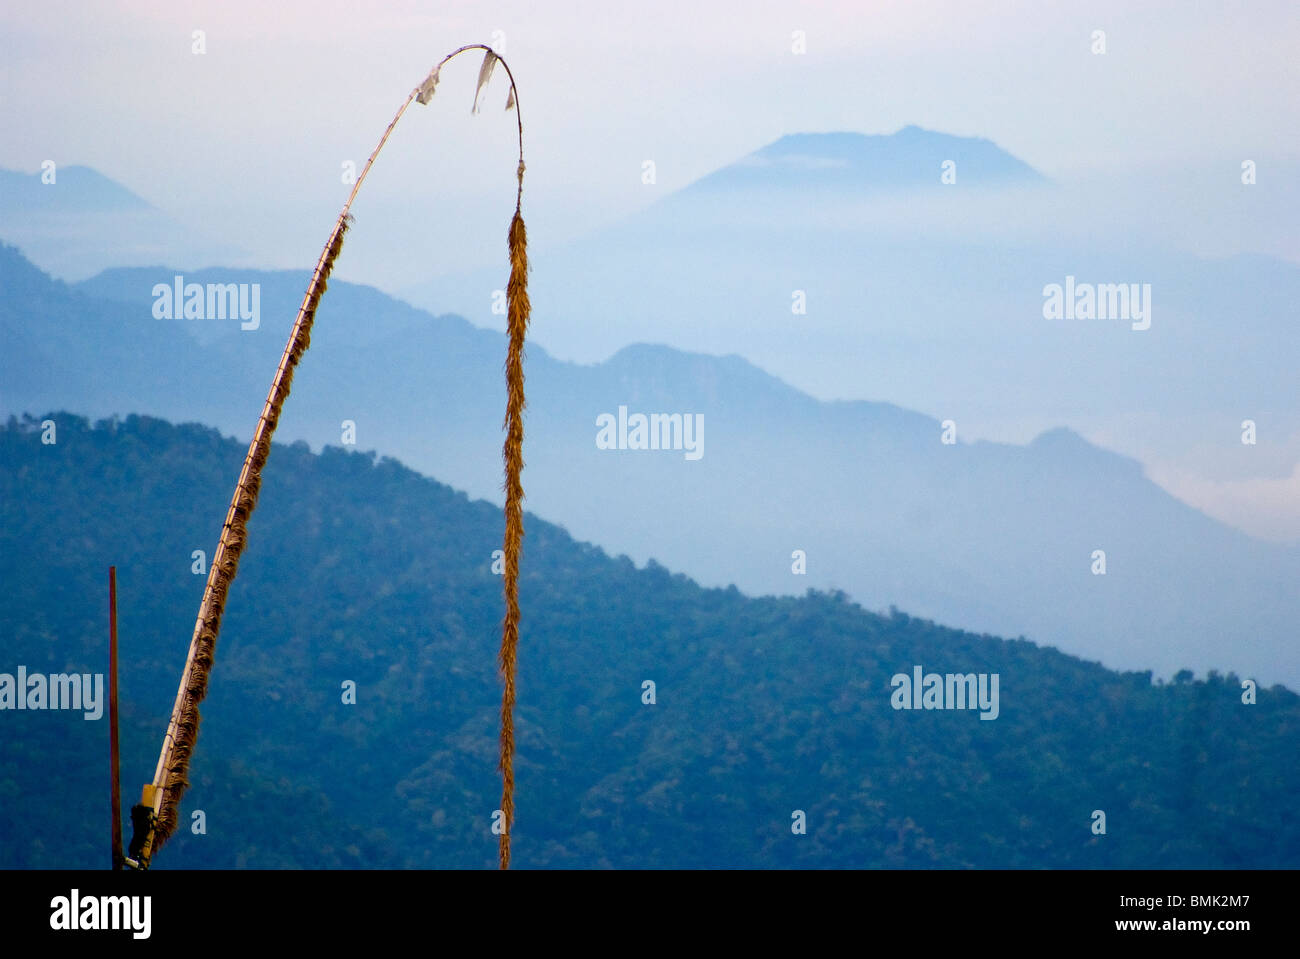 A penjor, or decorative bamboo pole, erected during Galungan, a holy holiday in Bali, Indonesia, swings in the wind. Java behind Stock Photo